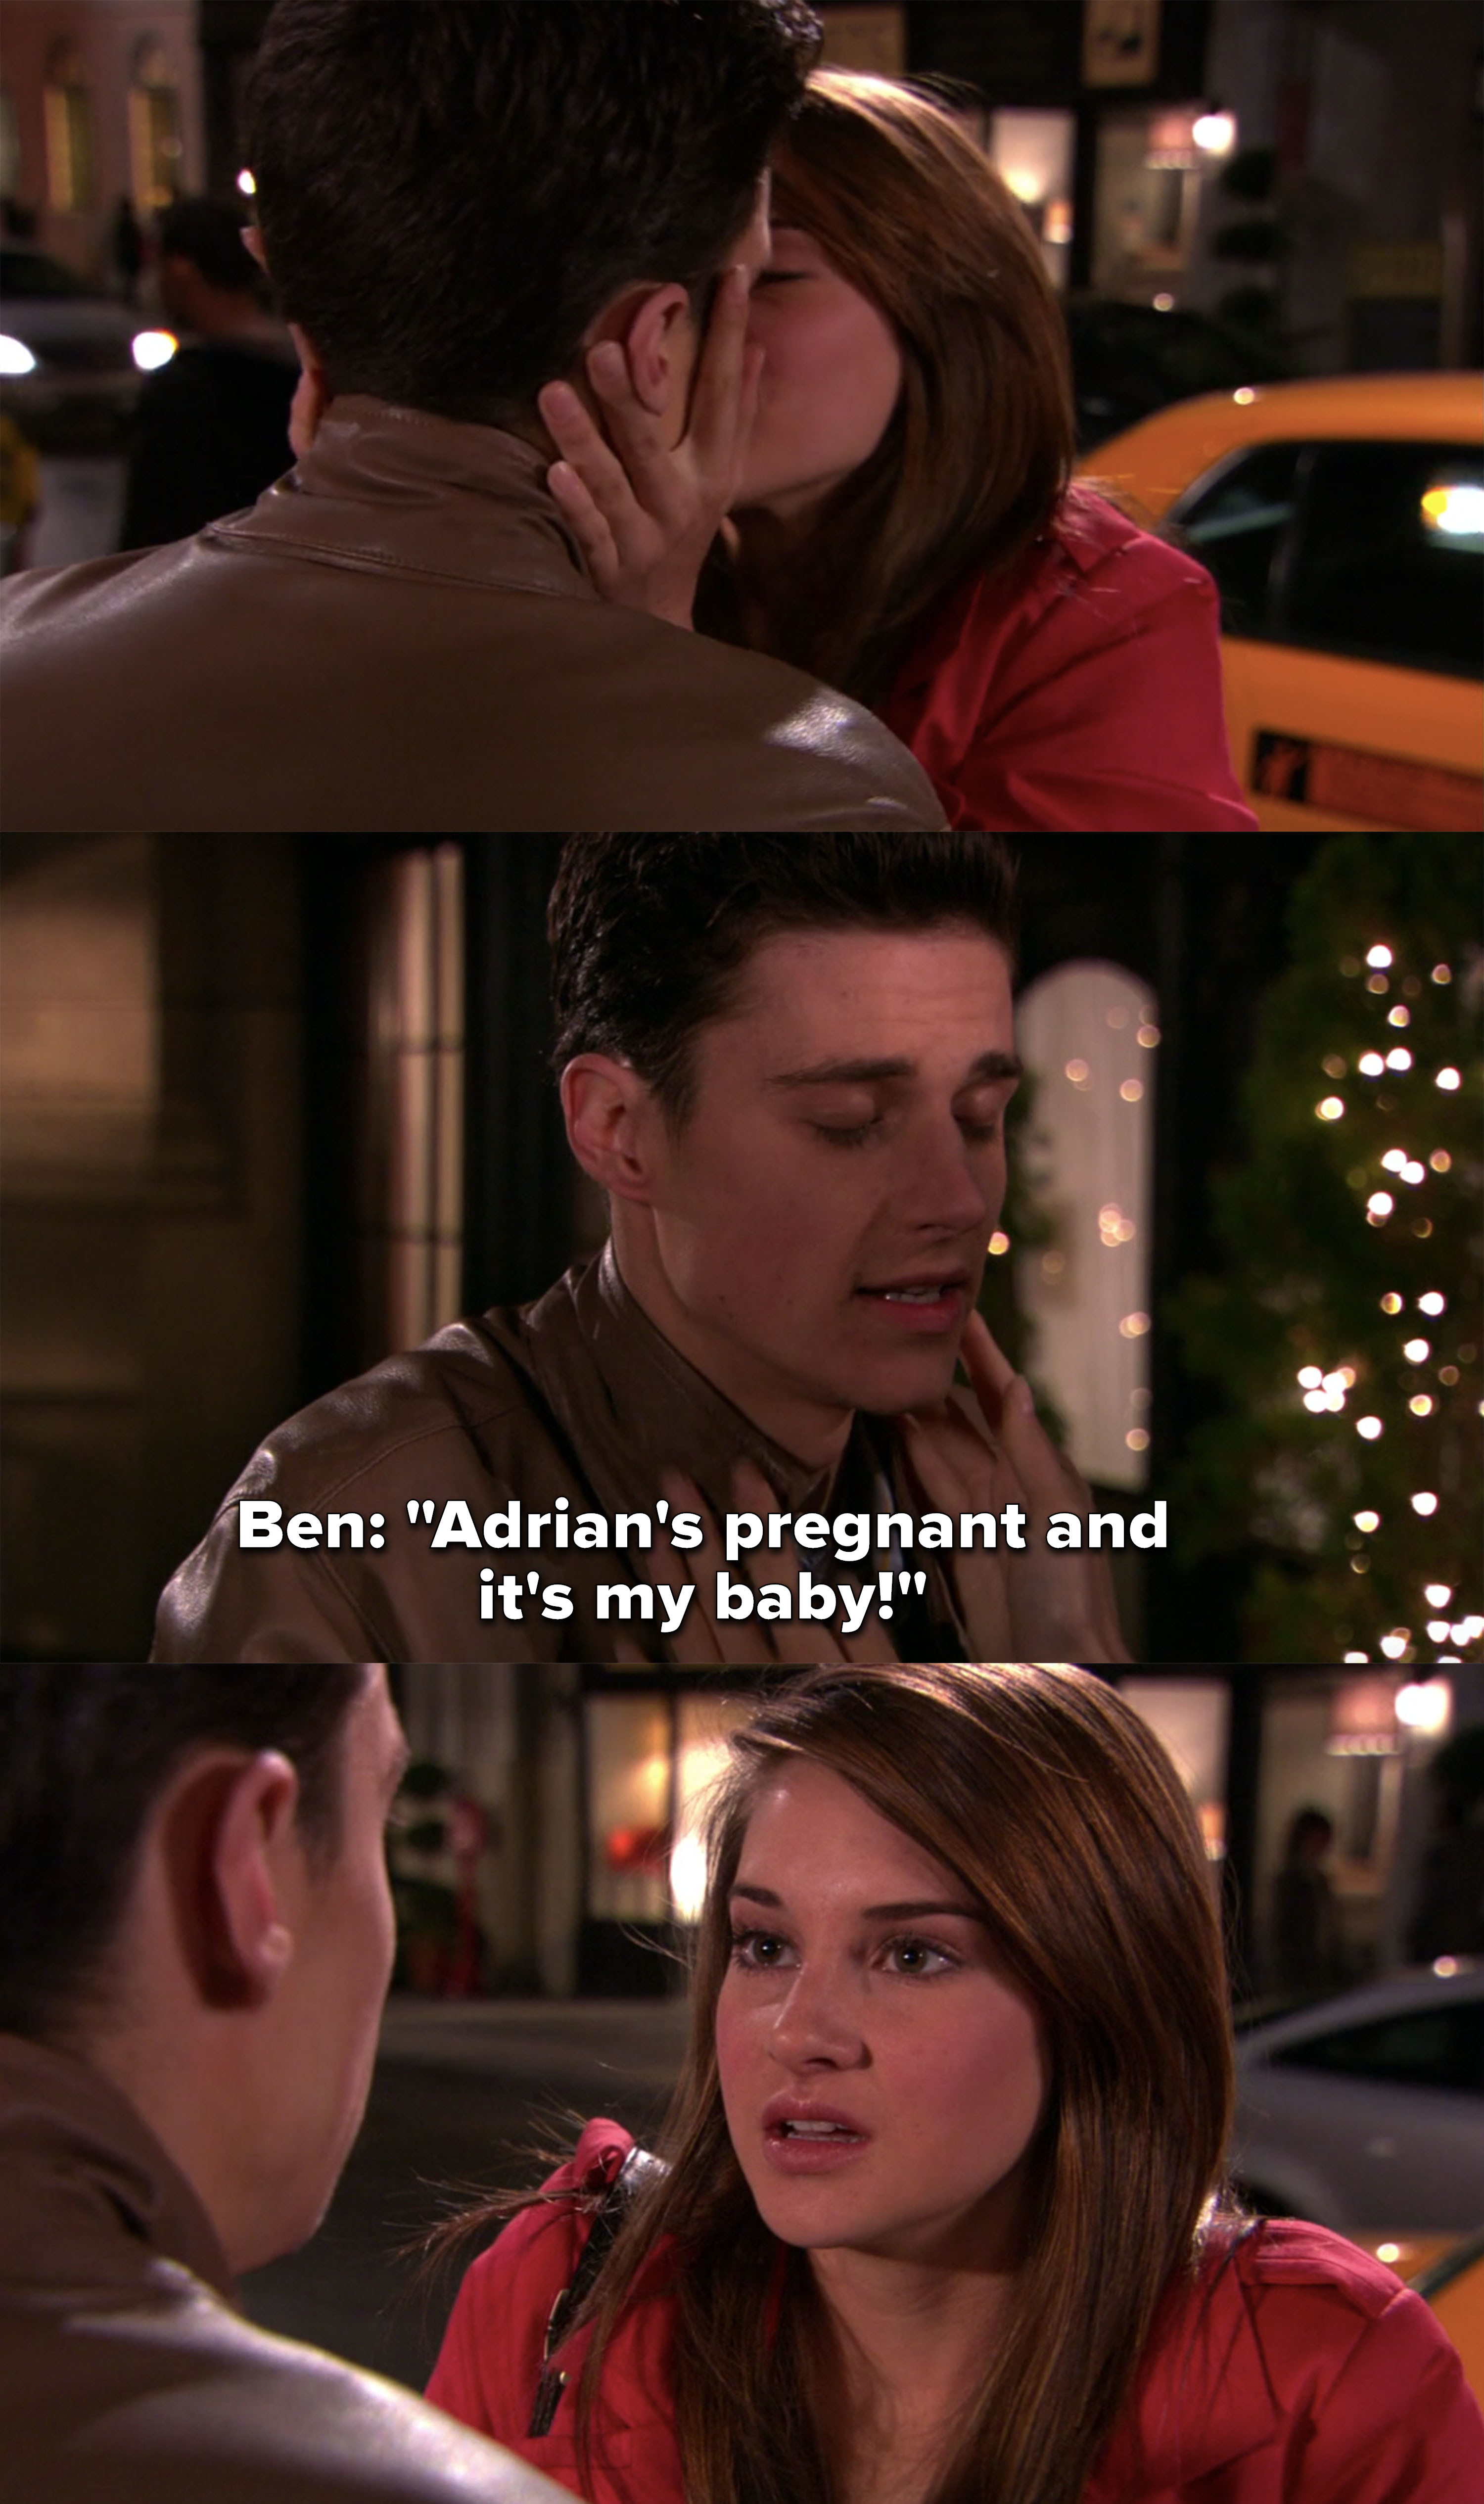 Amy kisses Ben and he blurts out that Adrian is pregnant with his baby